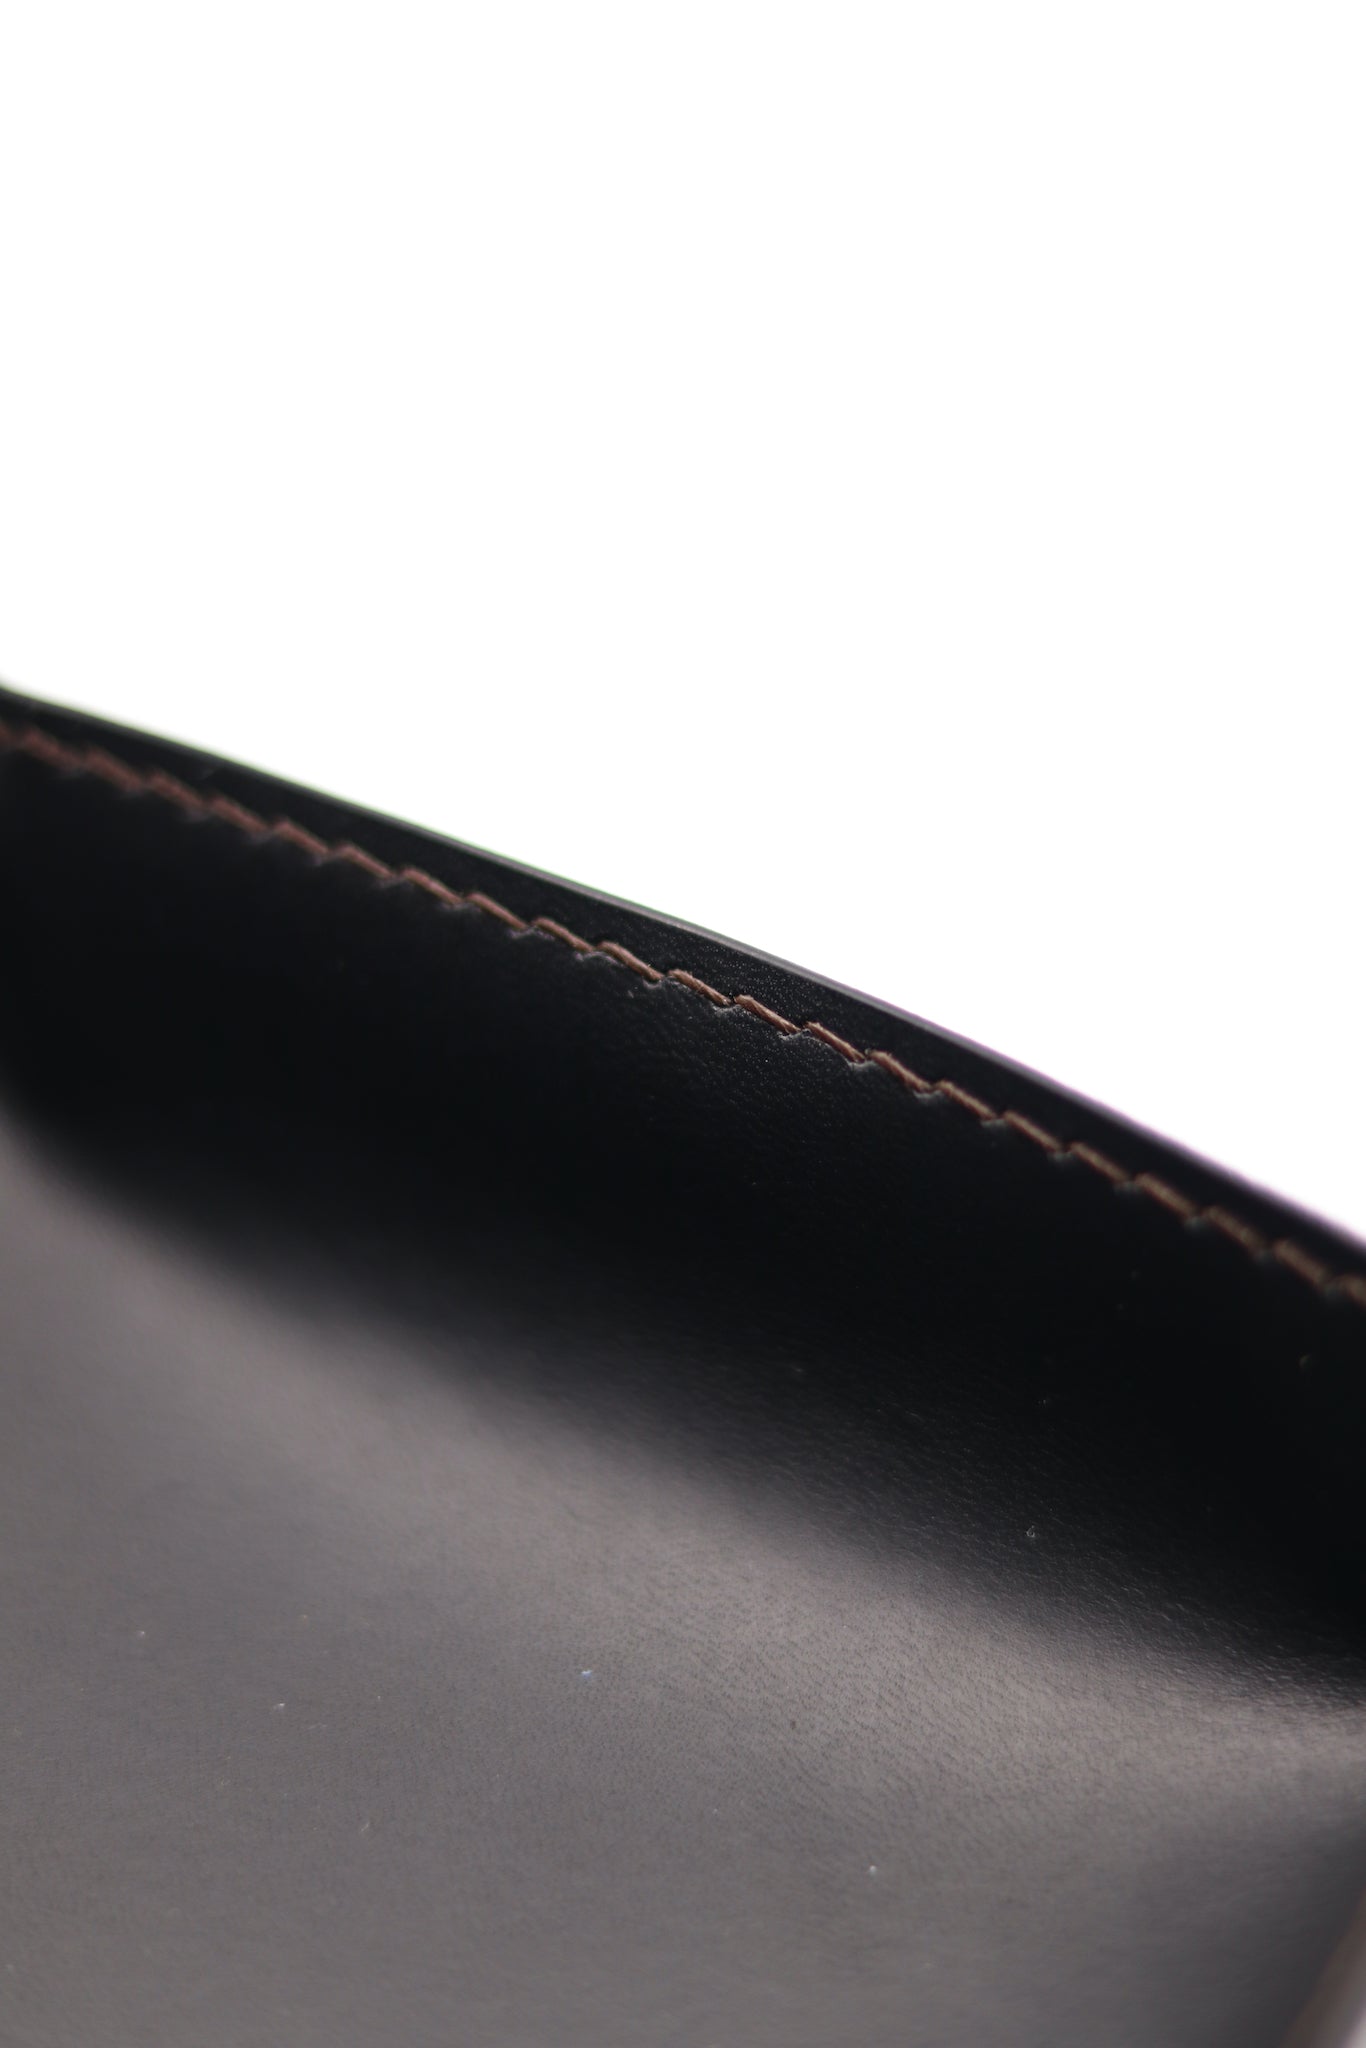 Stitching Detail of Handmade Petite Italian Buttero Leather Valet Tray